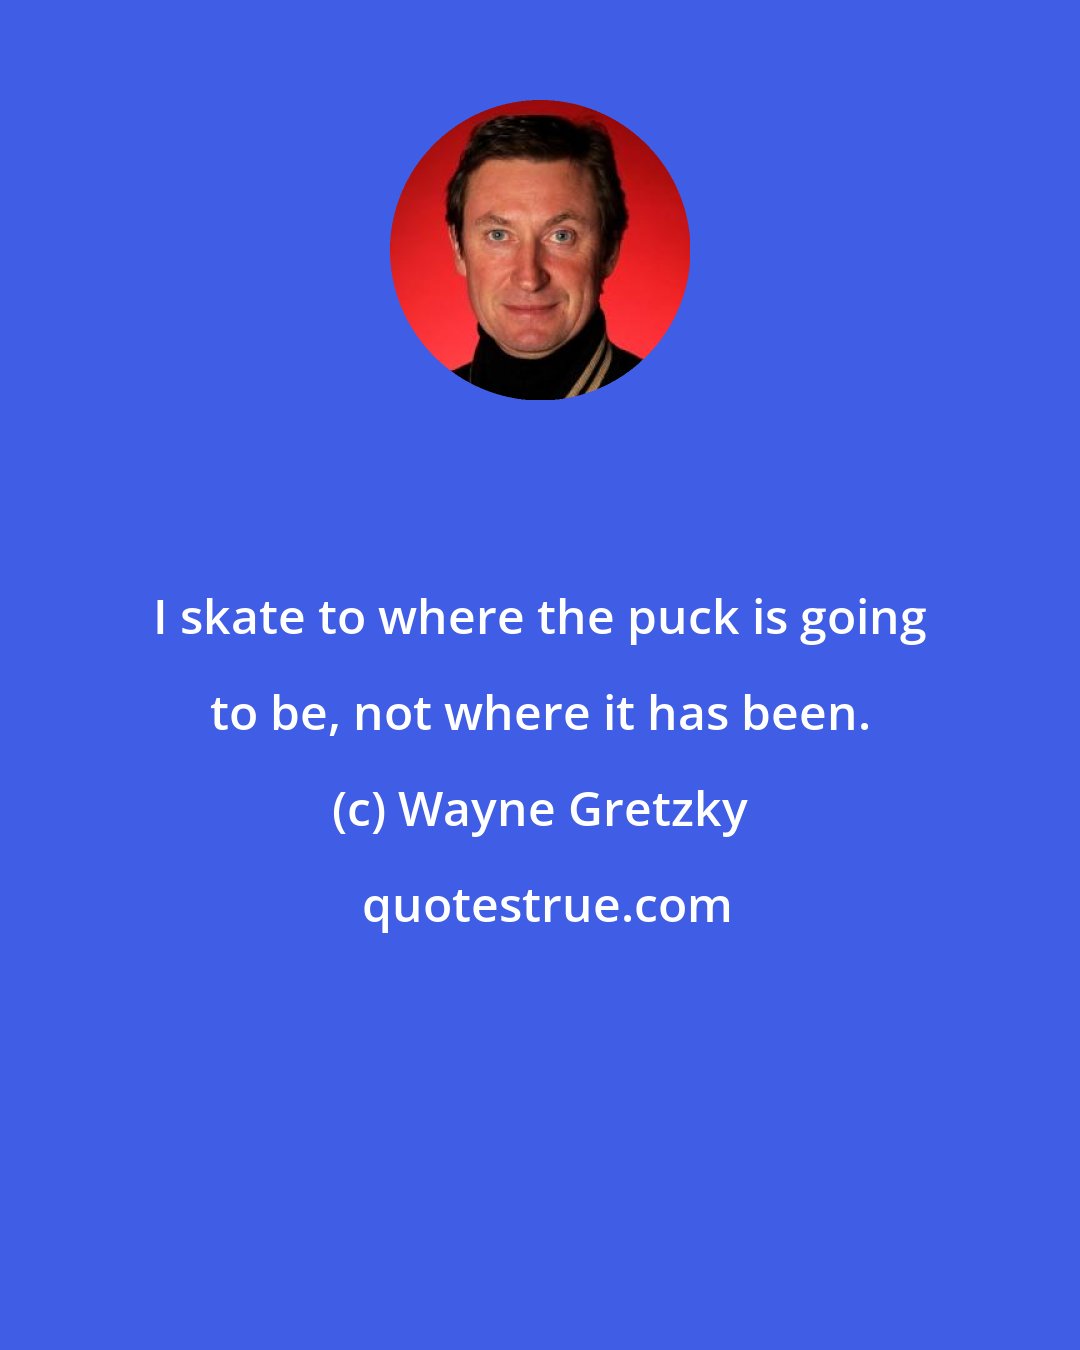 Wayne Gretzky: I skate to where the puck is going to be, not where it has been.